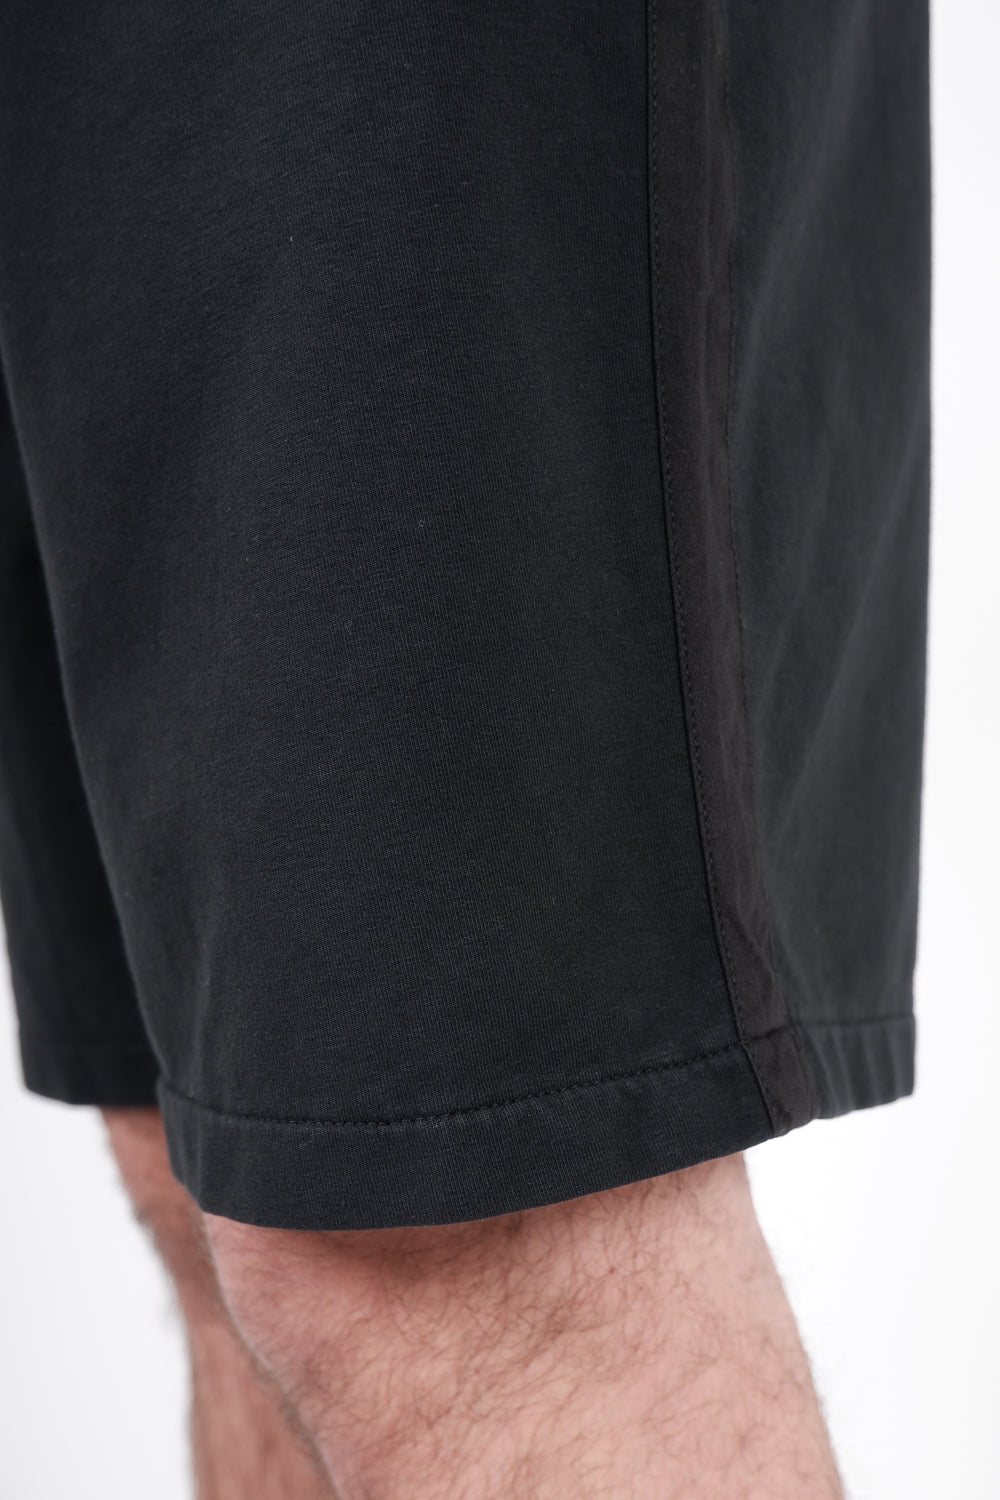 Buy the Daniele Fiesoli Cotton Shorts in Black at Intro. Spend £50 for free UK delivery. Official stockists. We ship worldwide.